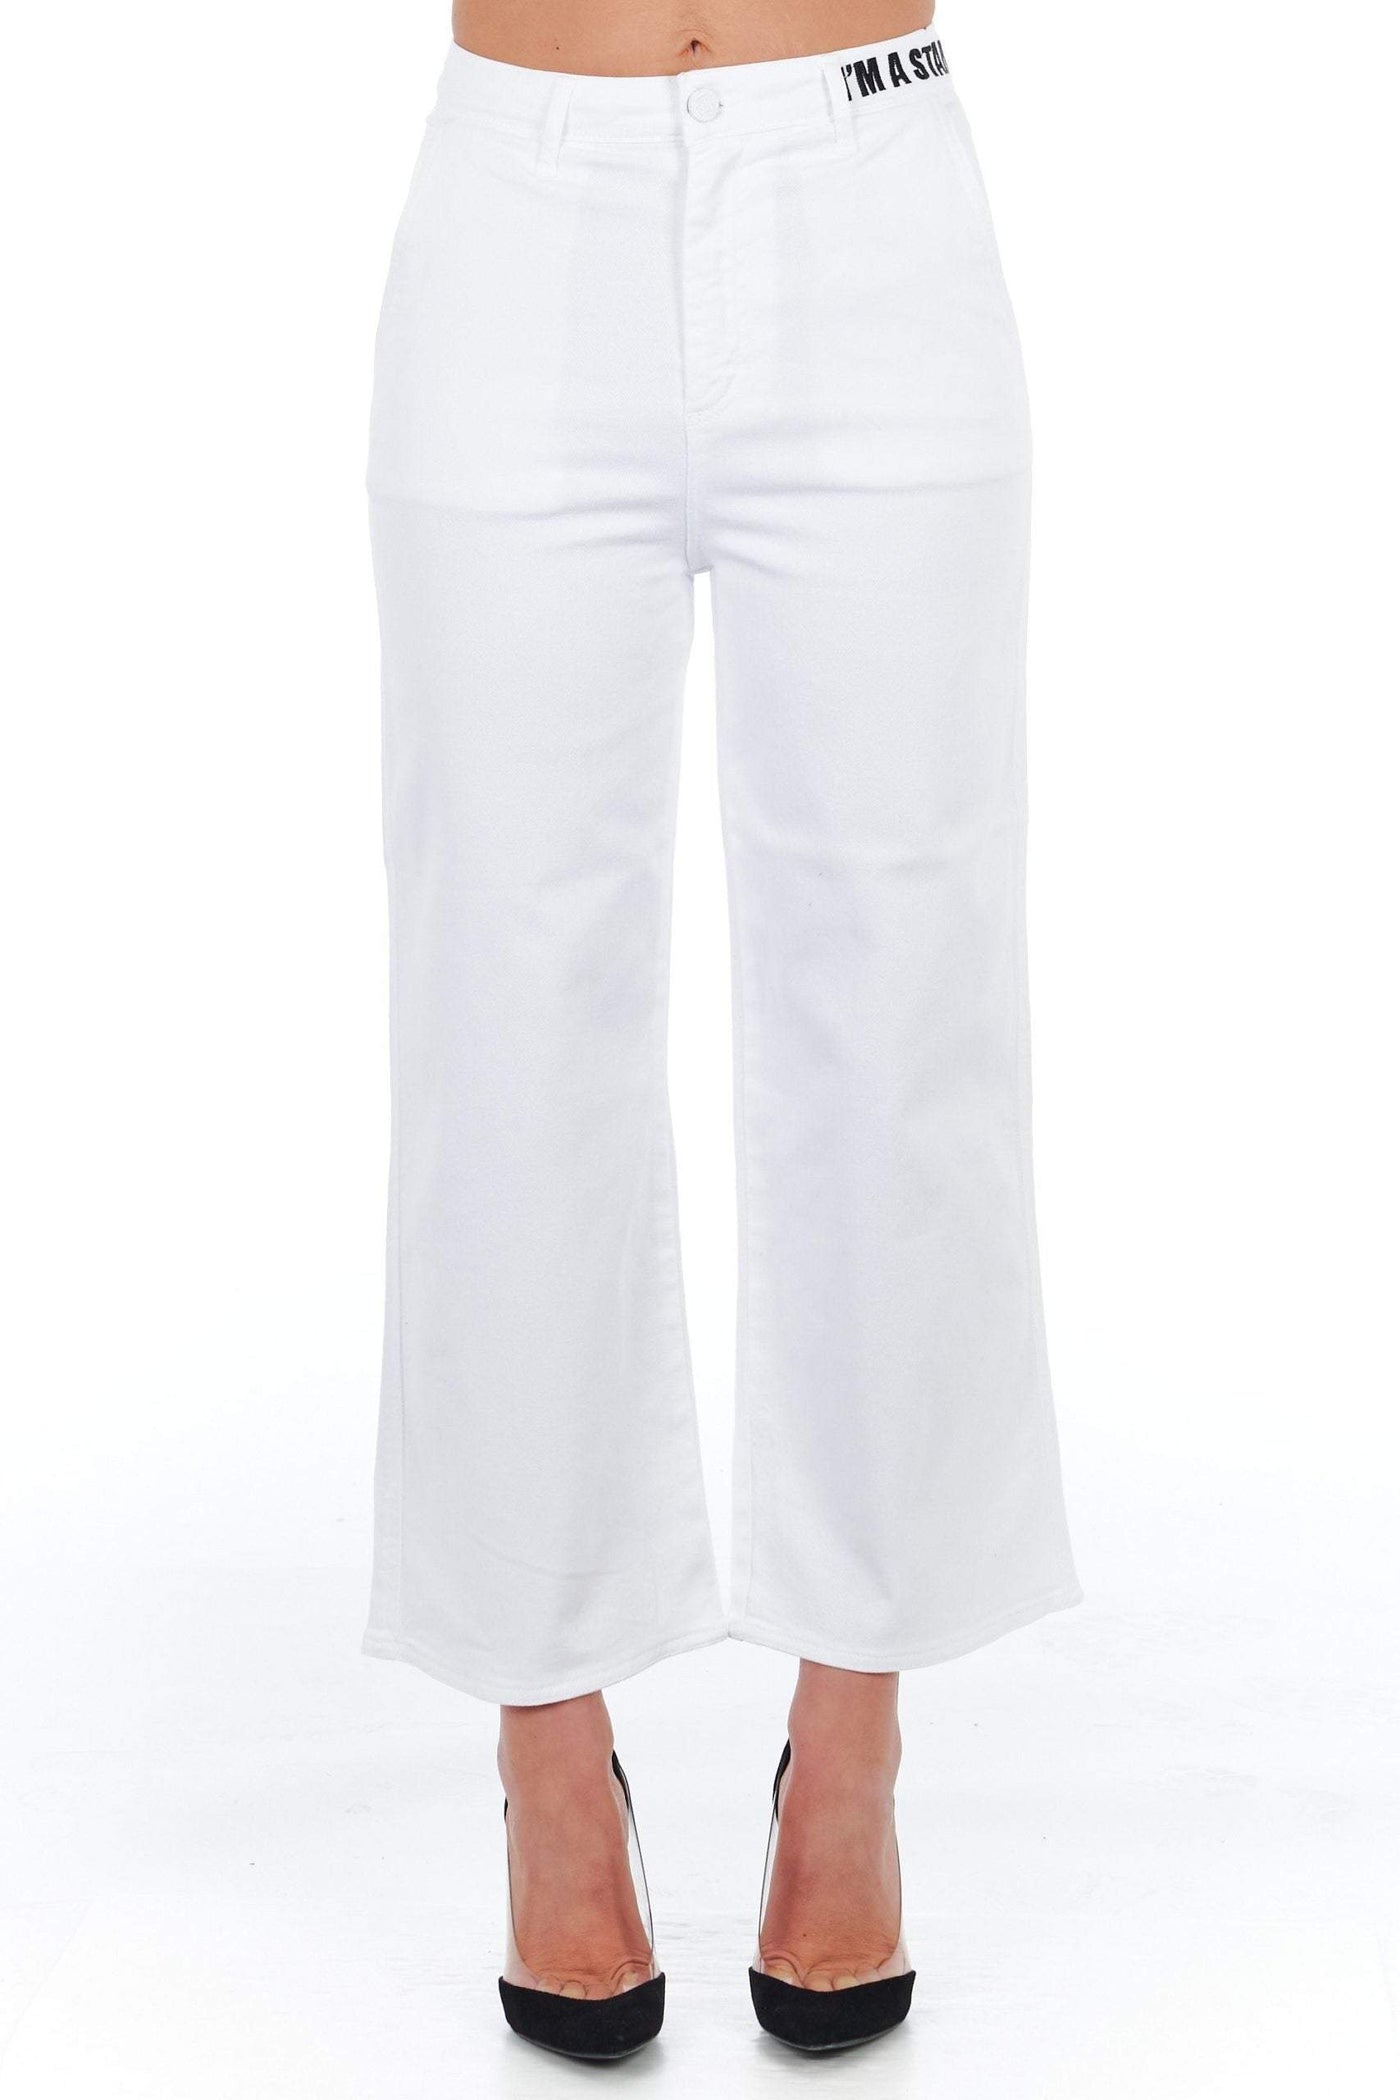 Frankie Morello high waisted multipockets Jeans & Pant #women, feed-agegroup-adult, feed-color-White, feed-gender-female, Frankie Morello, IT40 | XS, IT42 | S, IT44 | M, Jeans & Pants - Women - Clothing, White at SEYMAYKA